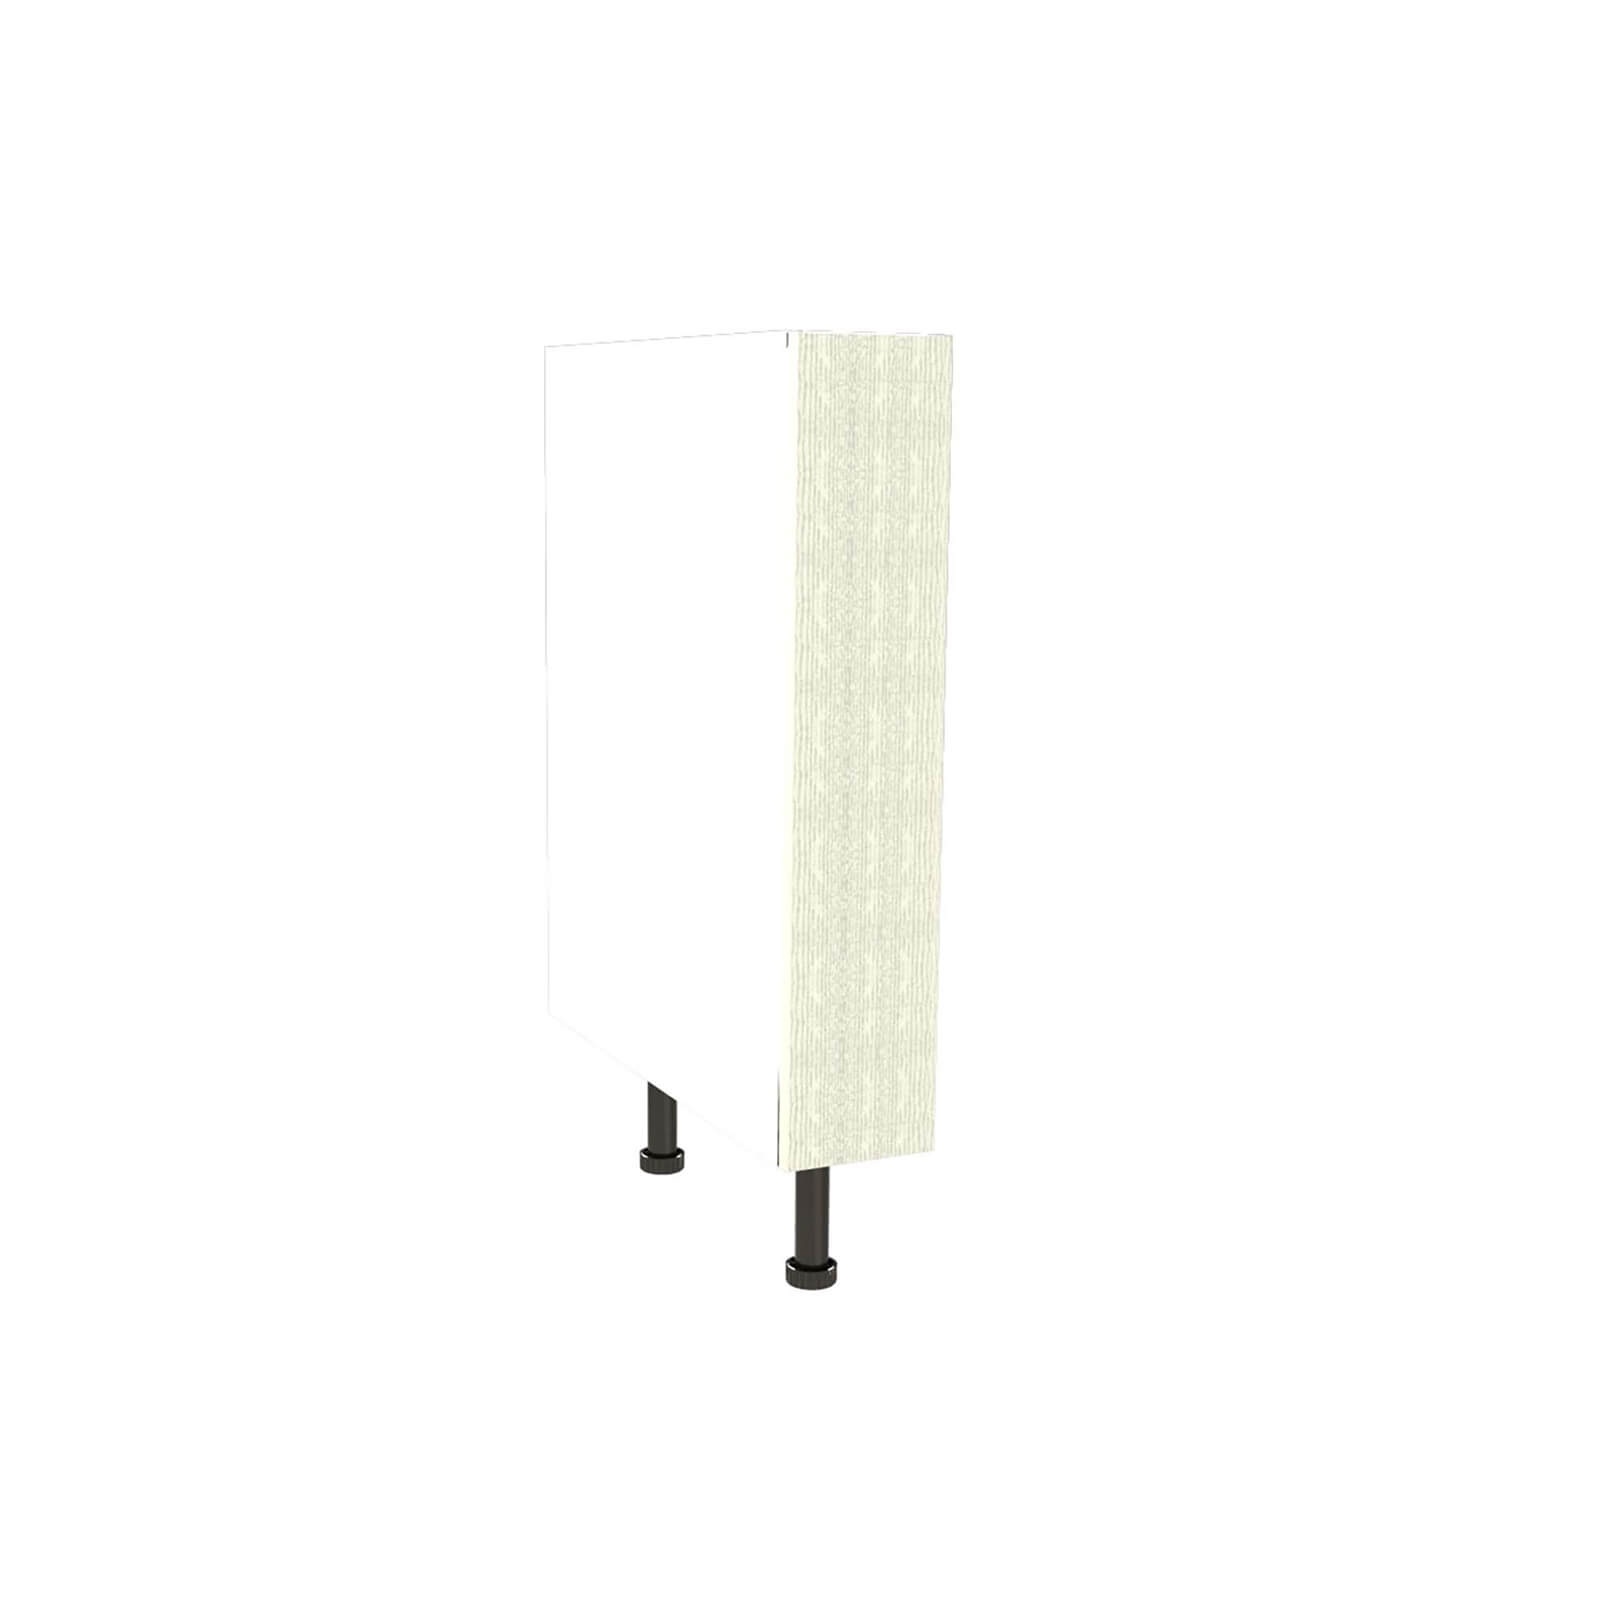 Timber Shaker Ivory 150mm Pull Out Unit